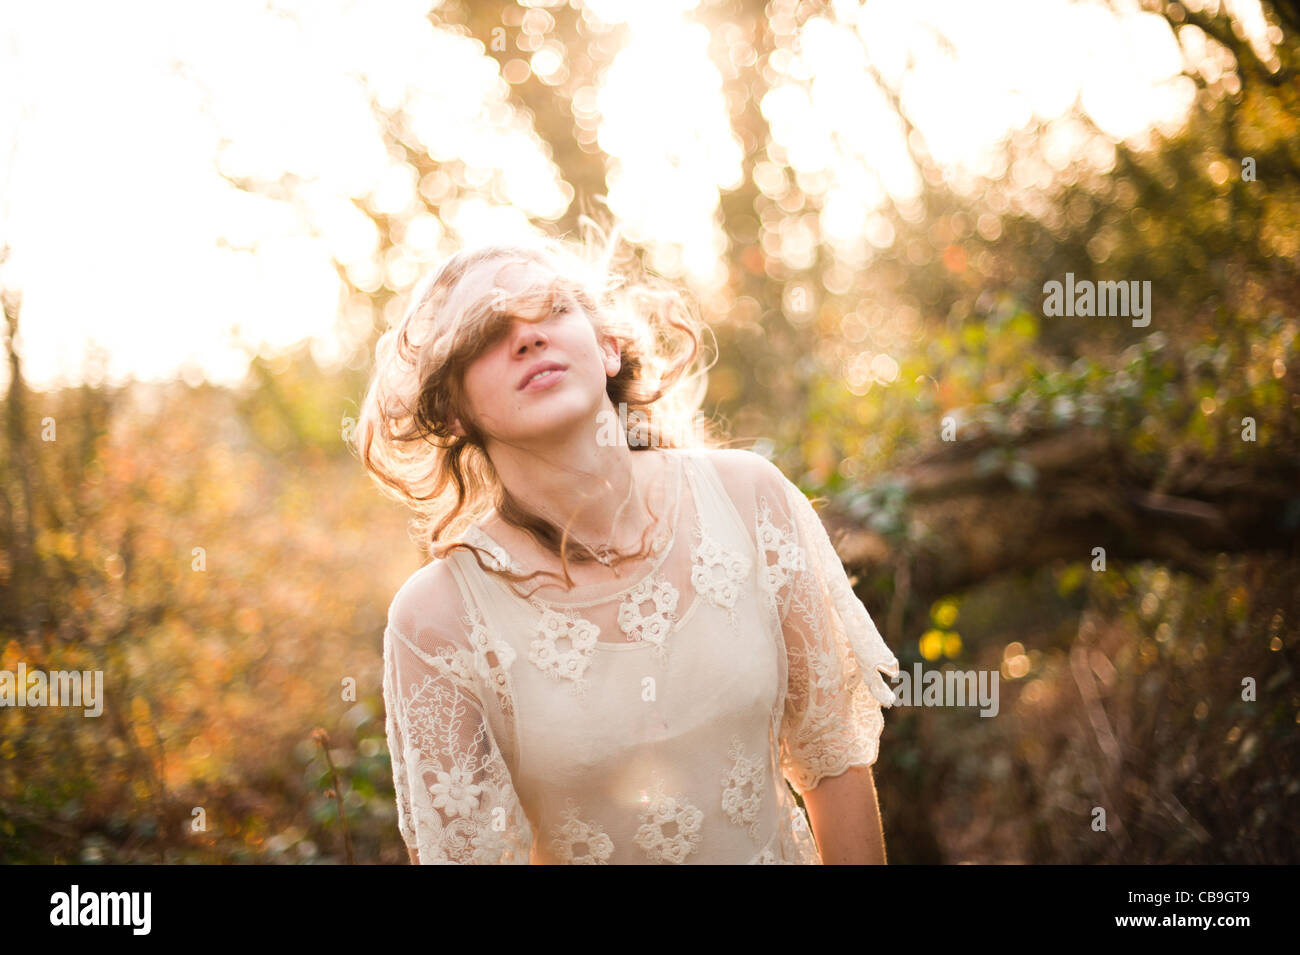 a slim blonde haired woman girl alone in woodland autumn afternoon daytime UK, backlight, backlit Stock Photo